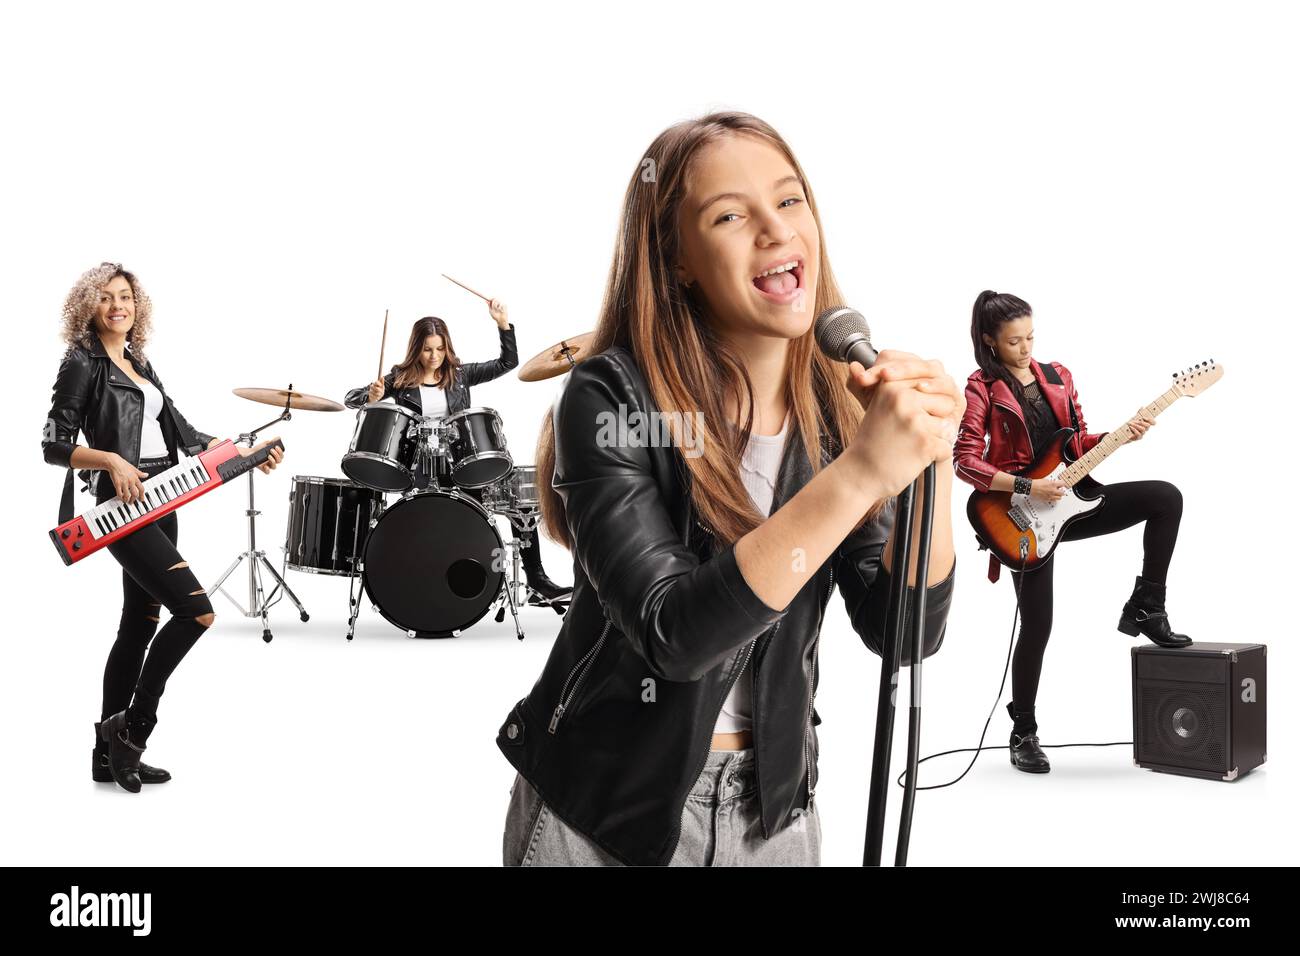 Vocalist in a female music band isolated on white background Stock Photo